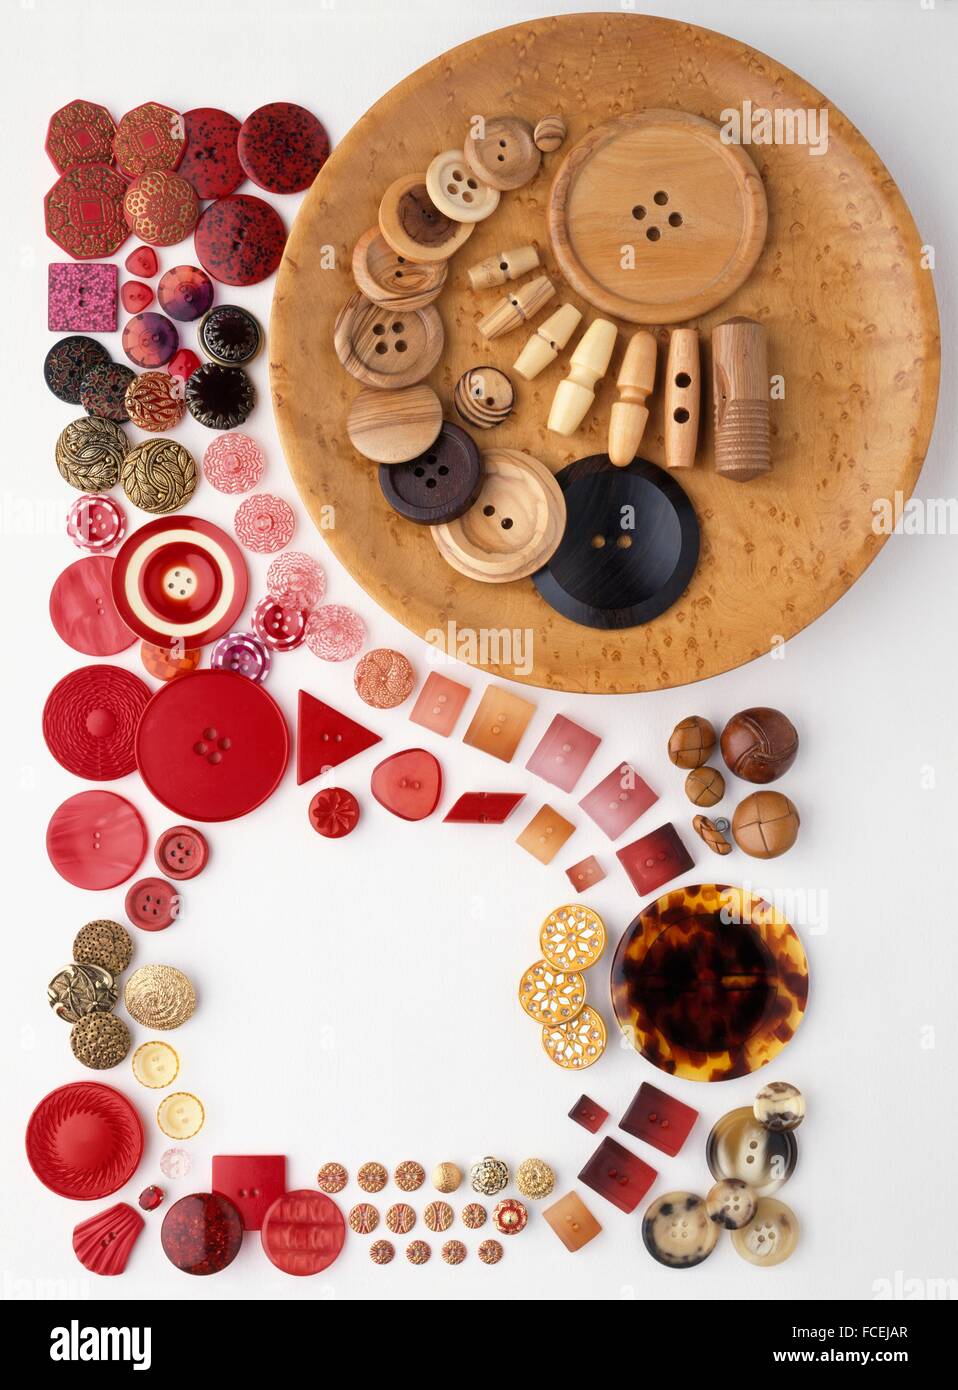 Arrangement of buttons including red and wooden buttons Stock Photo